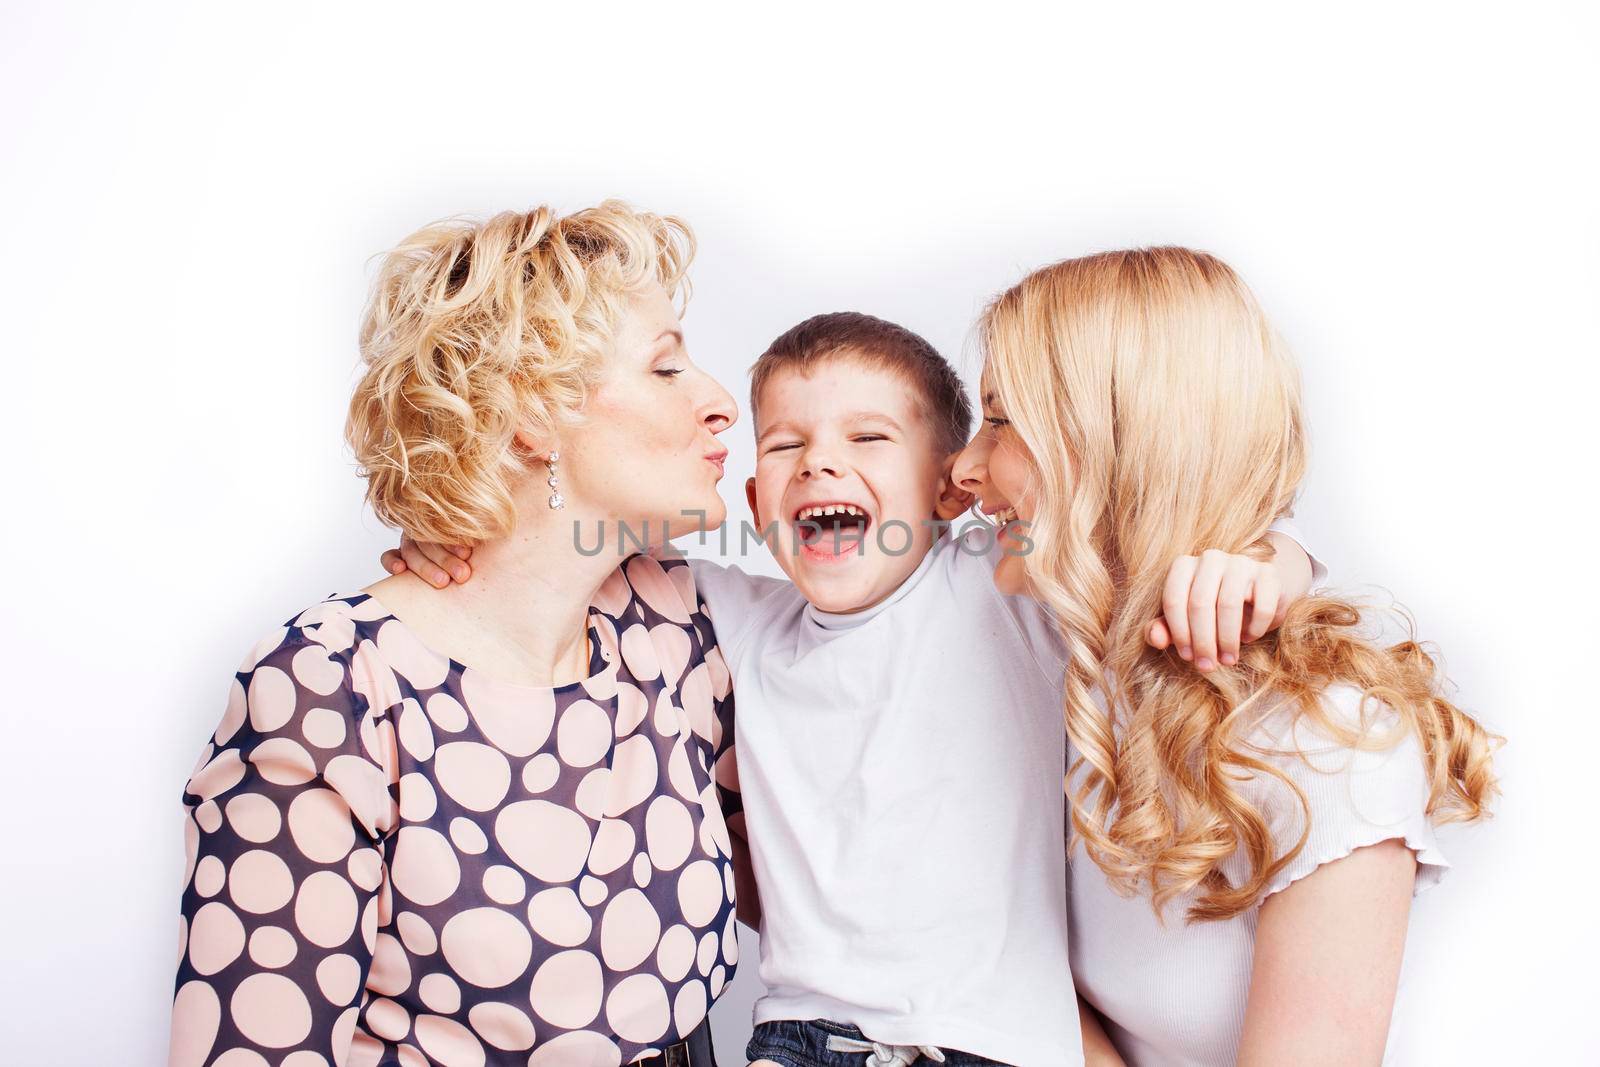 happy smiling blond family together posing cheerful on white background, generation concept. lifestyle people close up